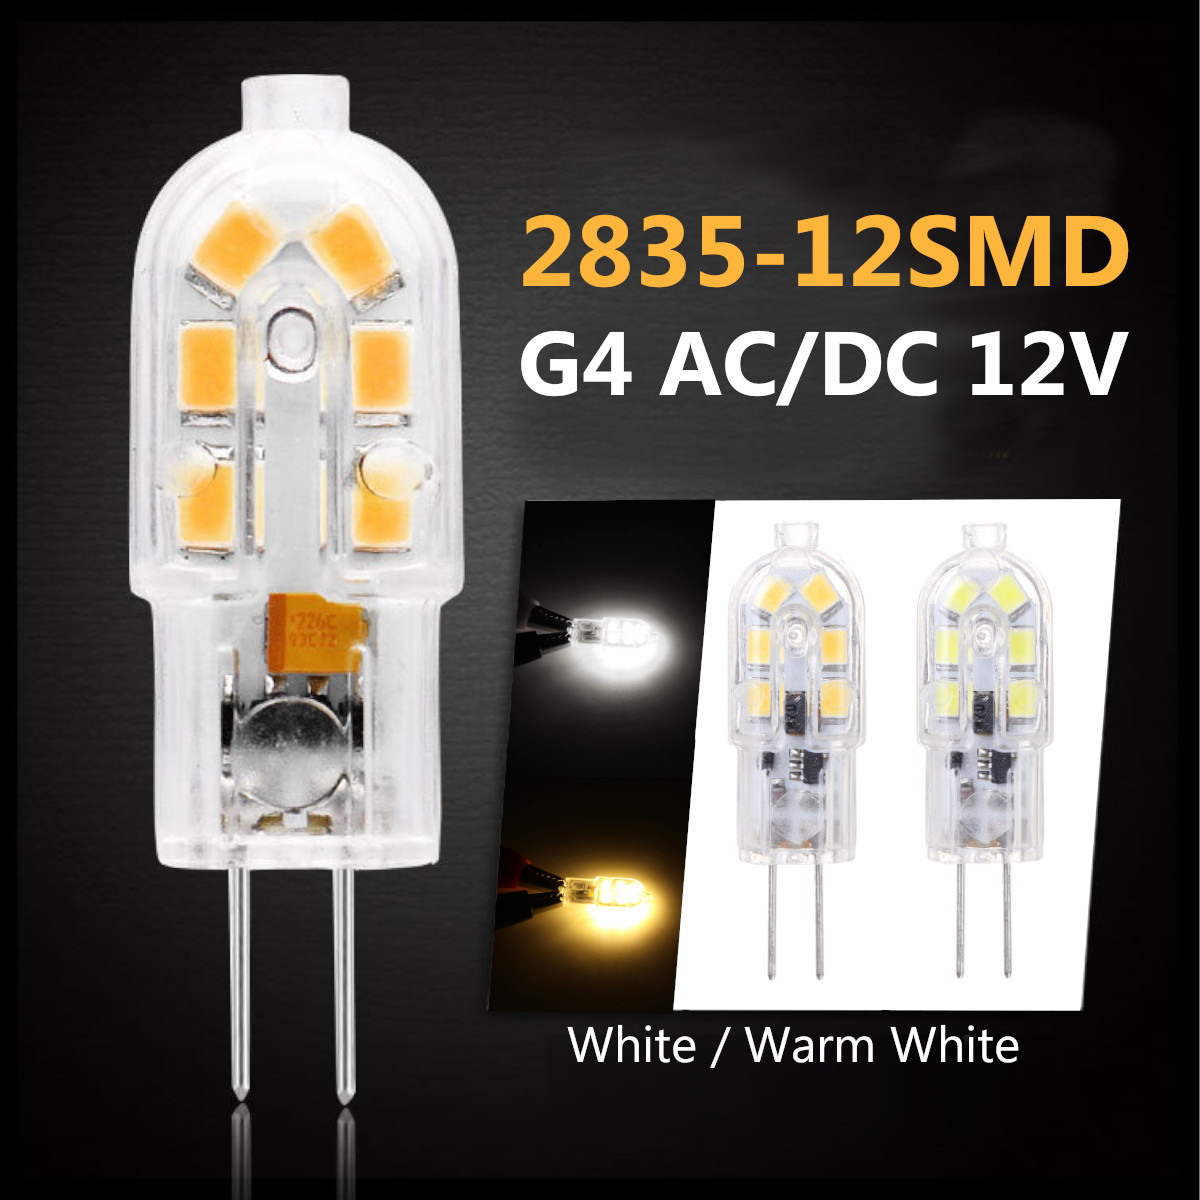 G4 White Non-Dimmable 51SMD 2835 LED 3.5W Ceiling Chandelier Light Bulbs AC 220V 